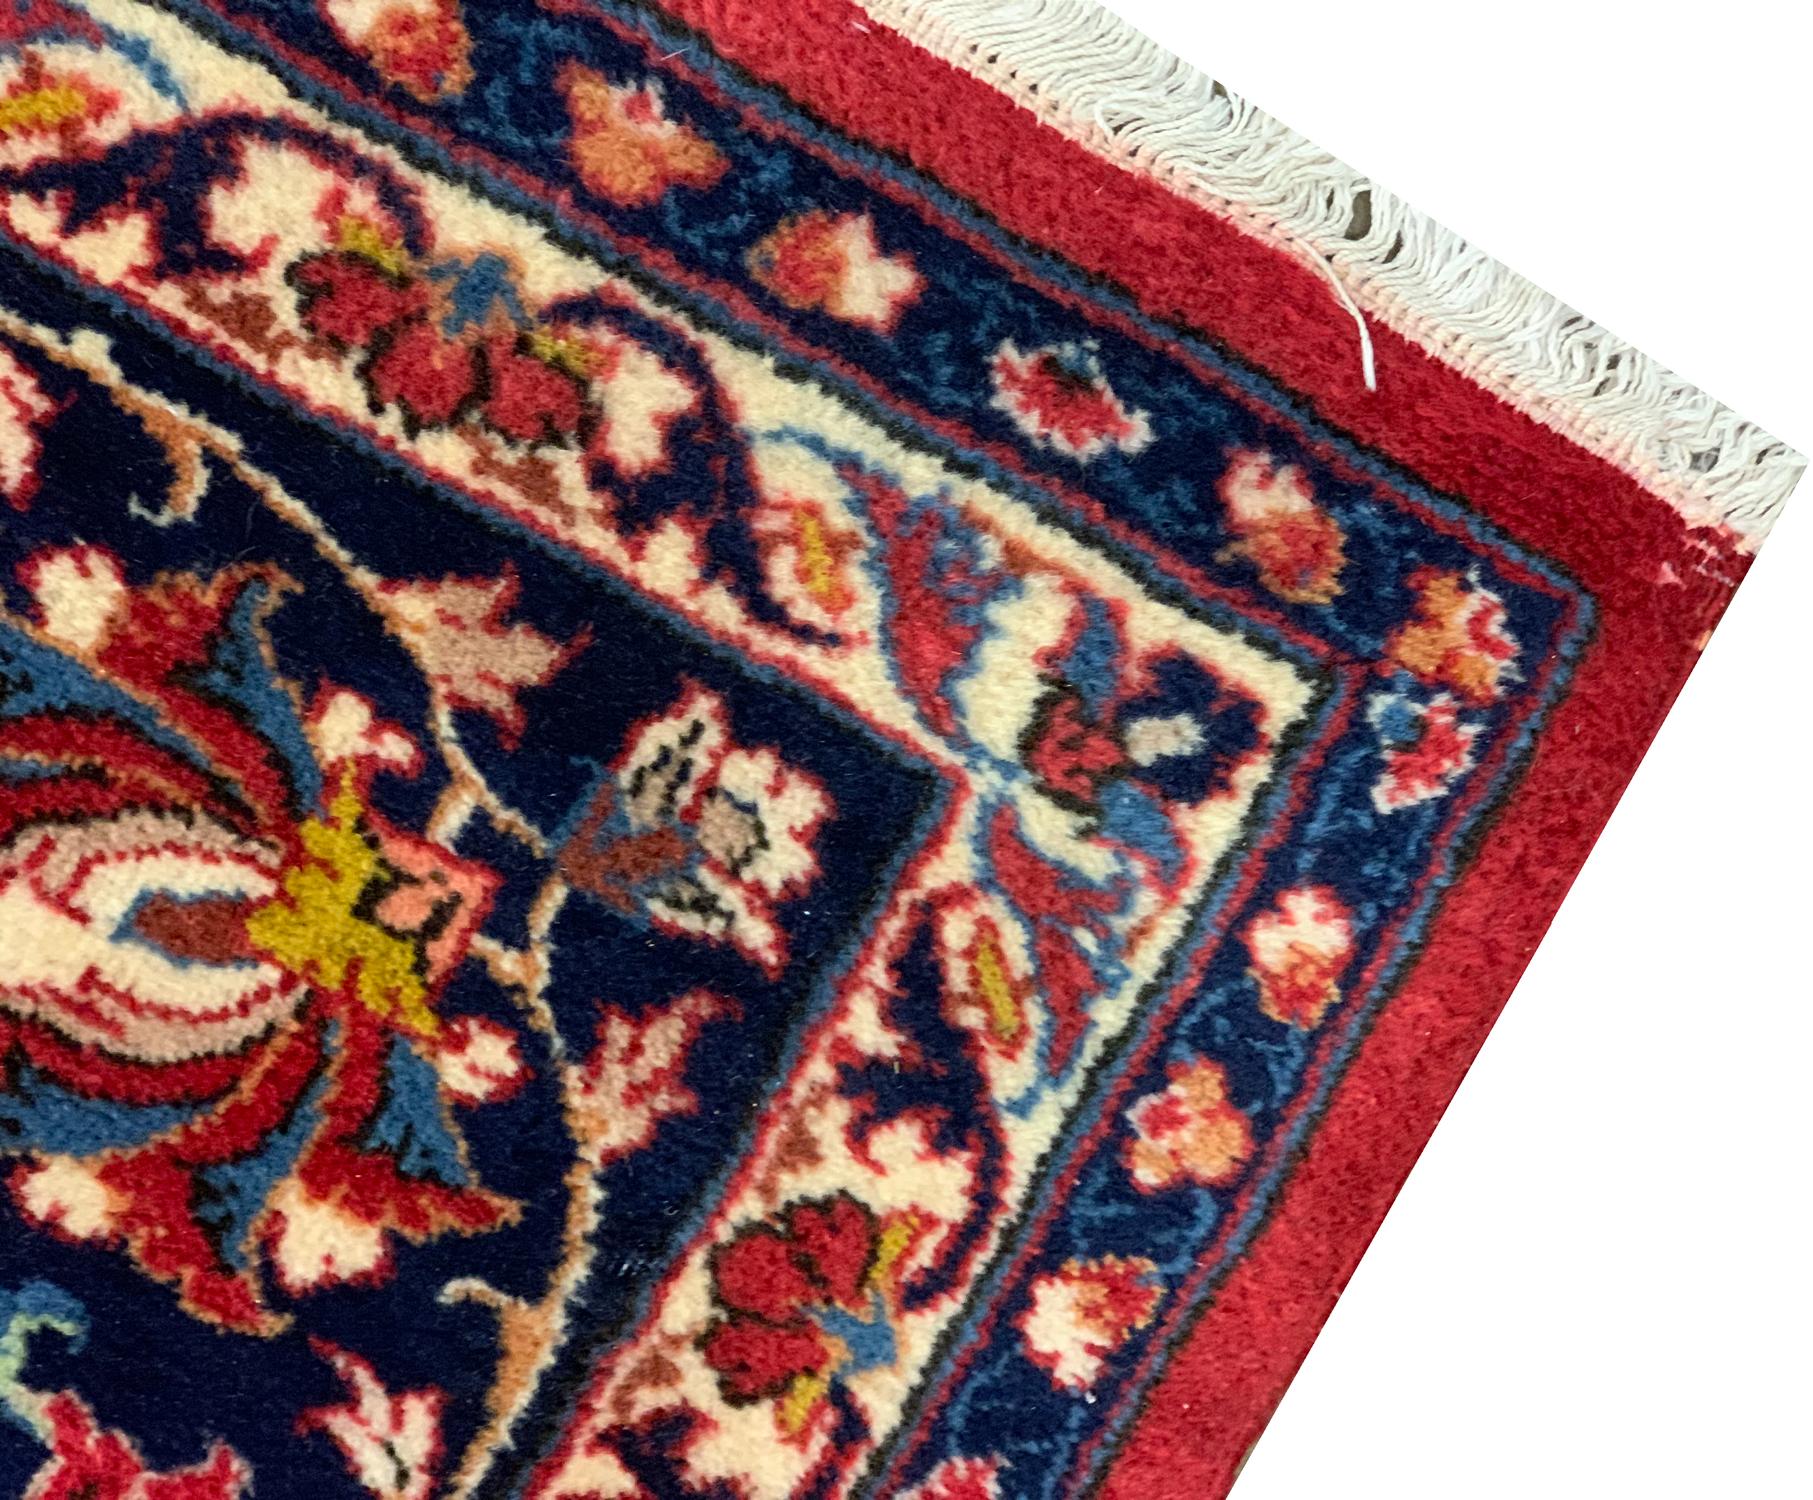 Hand-Crafted Vintage Wool Area Rug Handwoven Oriental Red Blue Carpet For Sale